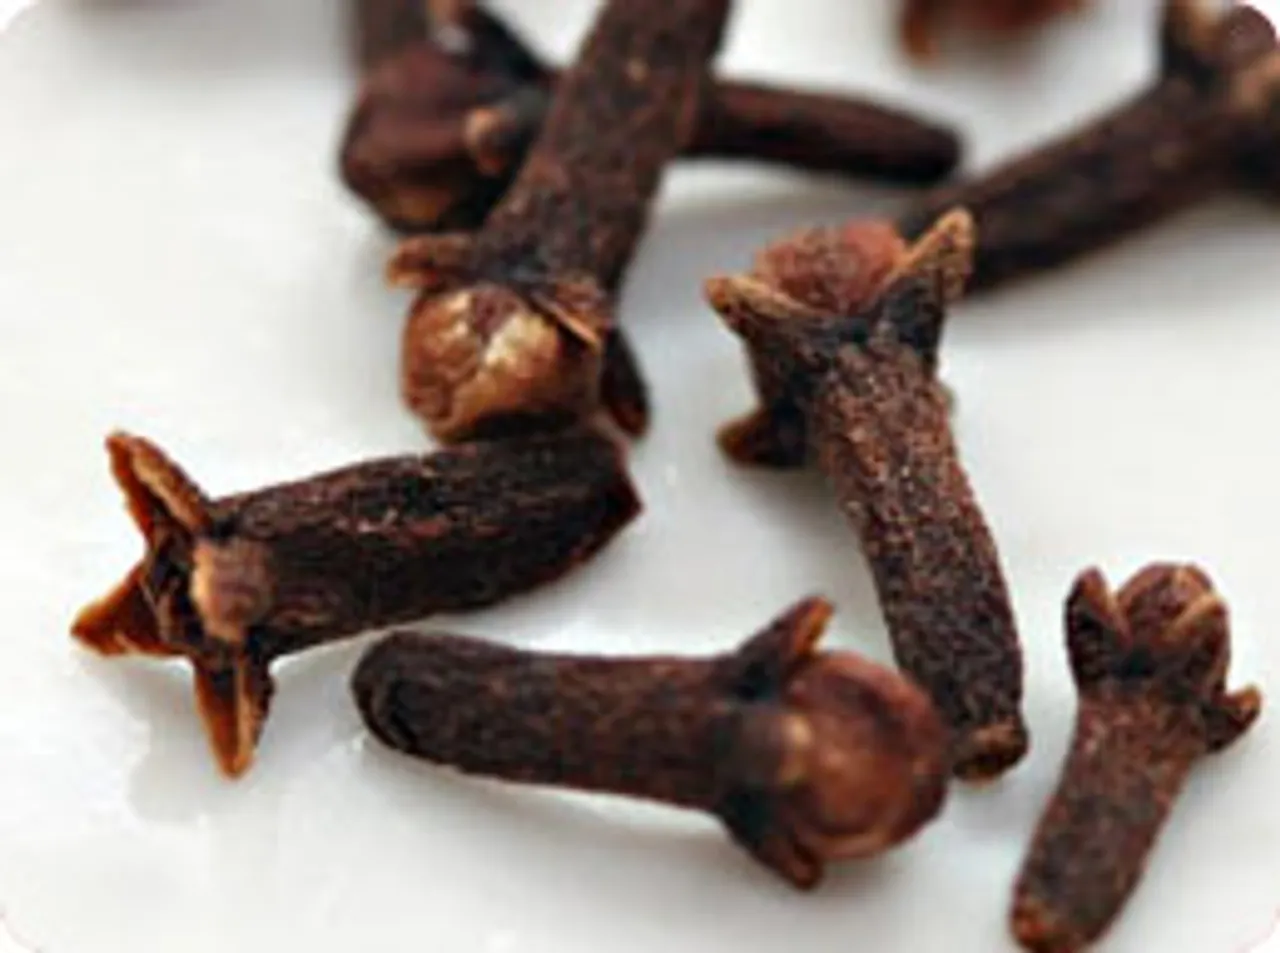 Hand in clove with a spice